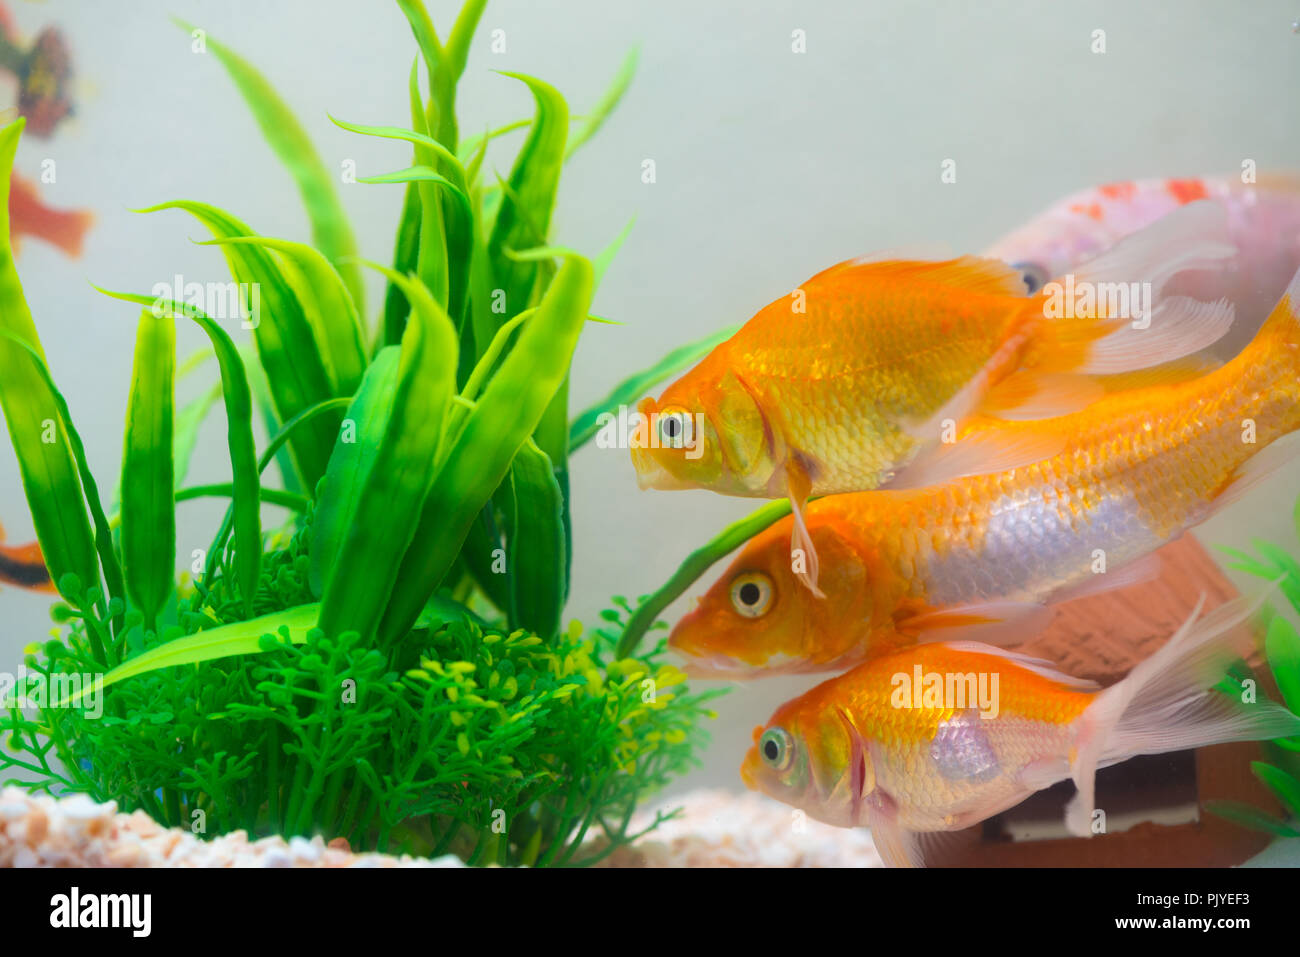 https://c8.alamy.com/comp/PJYEF3/little-fish-in-fish-tank-or-aquarium-gold-fish-guppy-and-red-fish-fancy-carp-with-green-plant-underwater-life-concept-PJYEF3.jpg